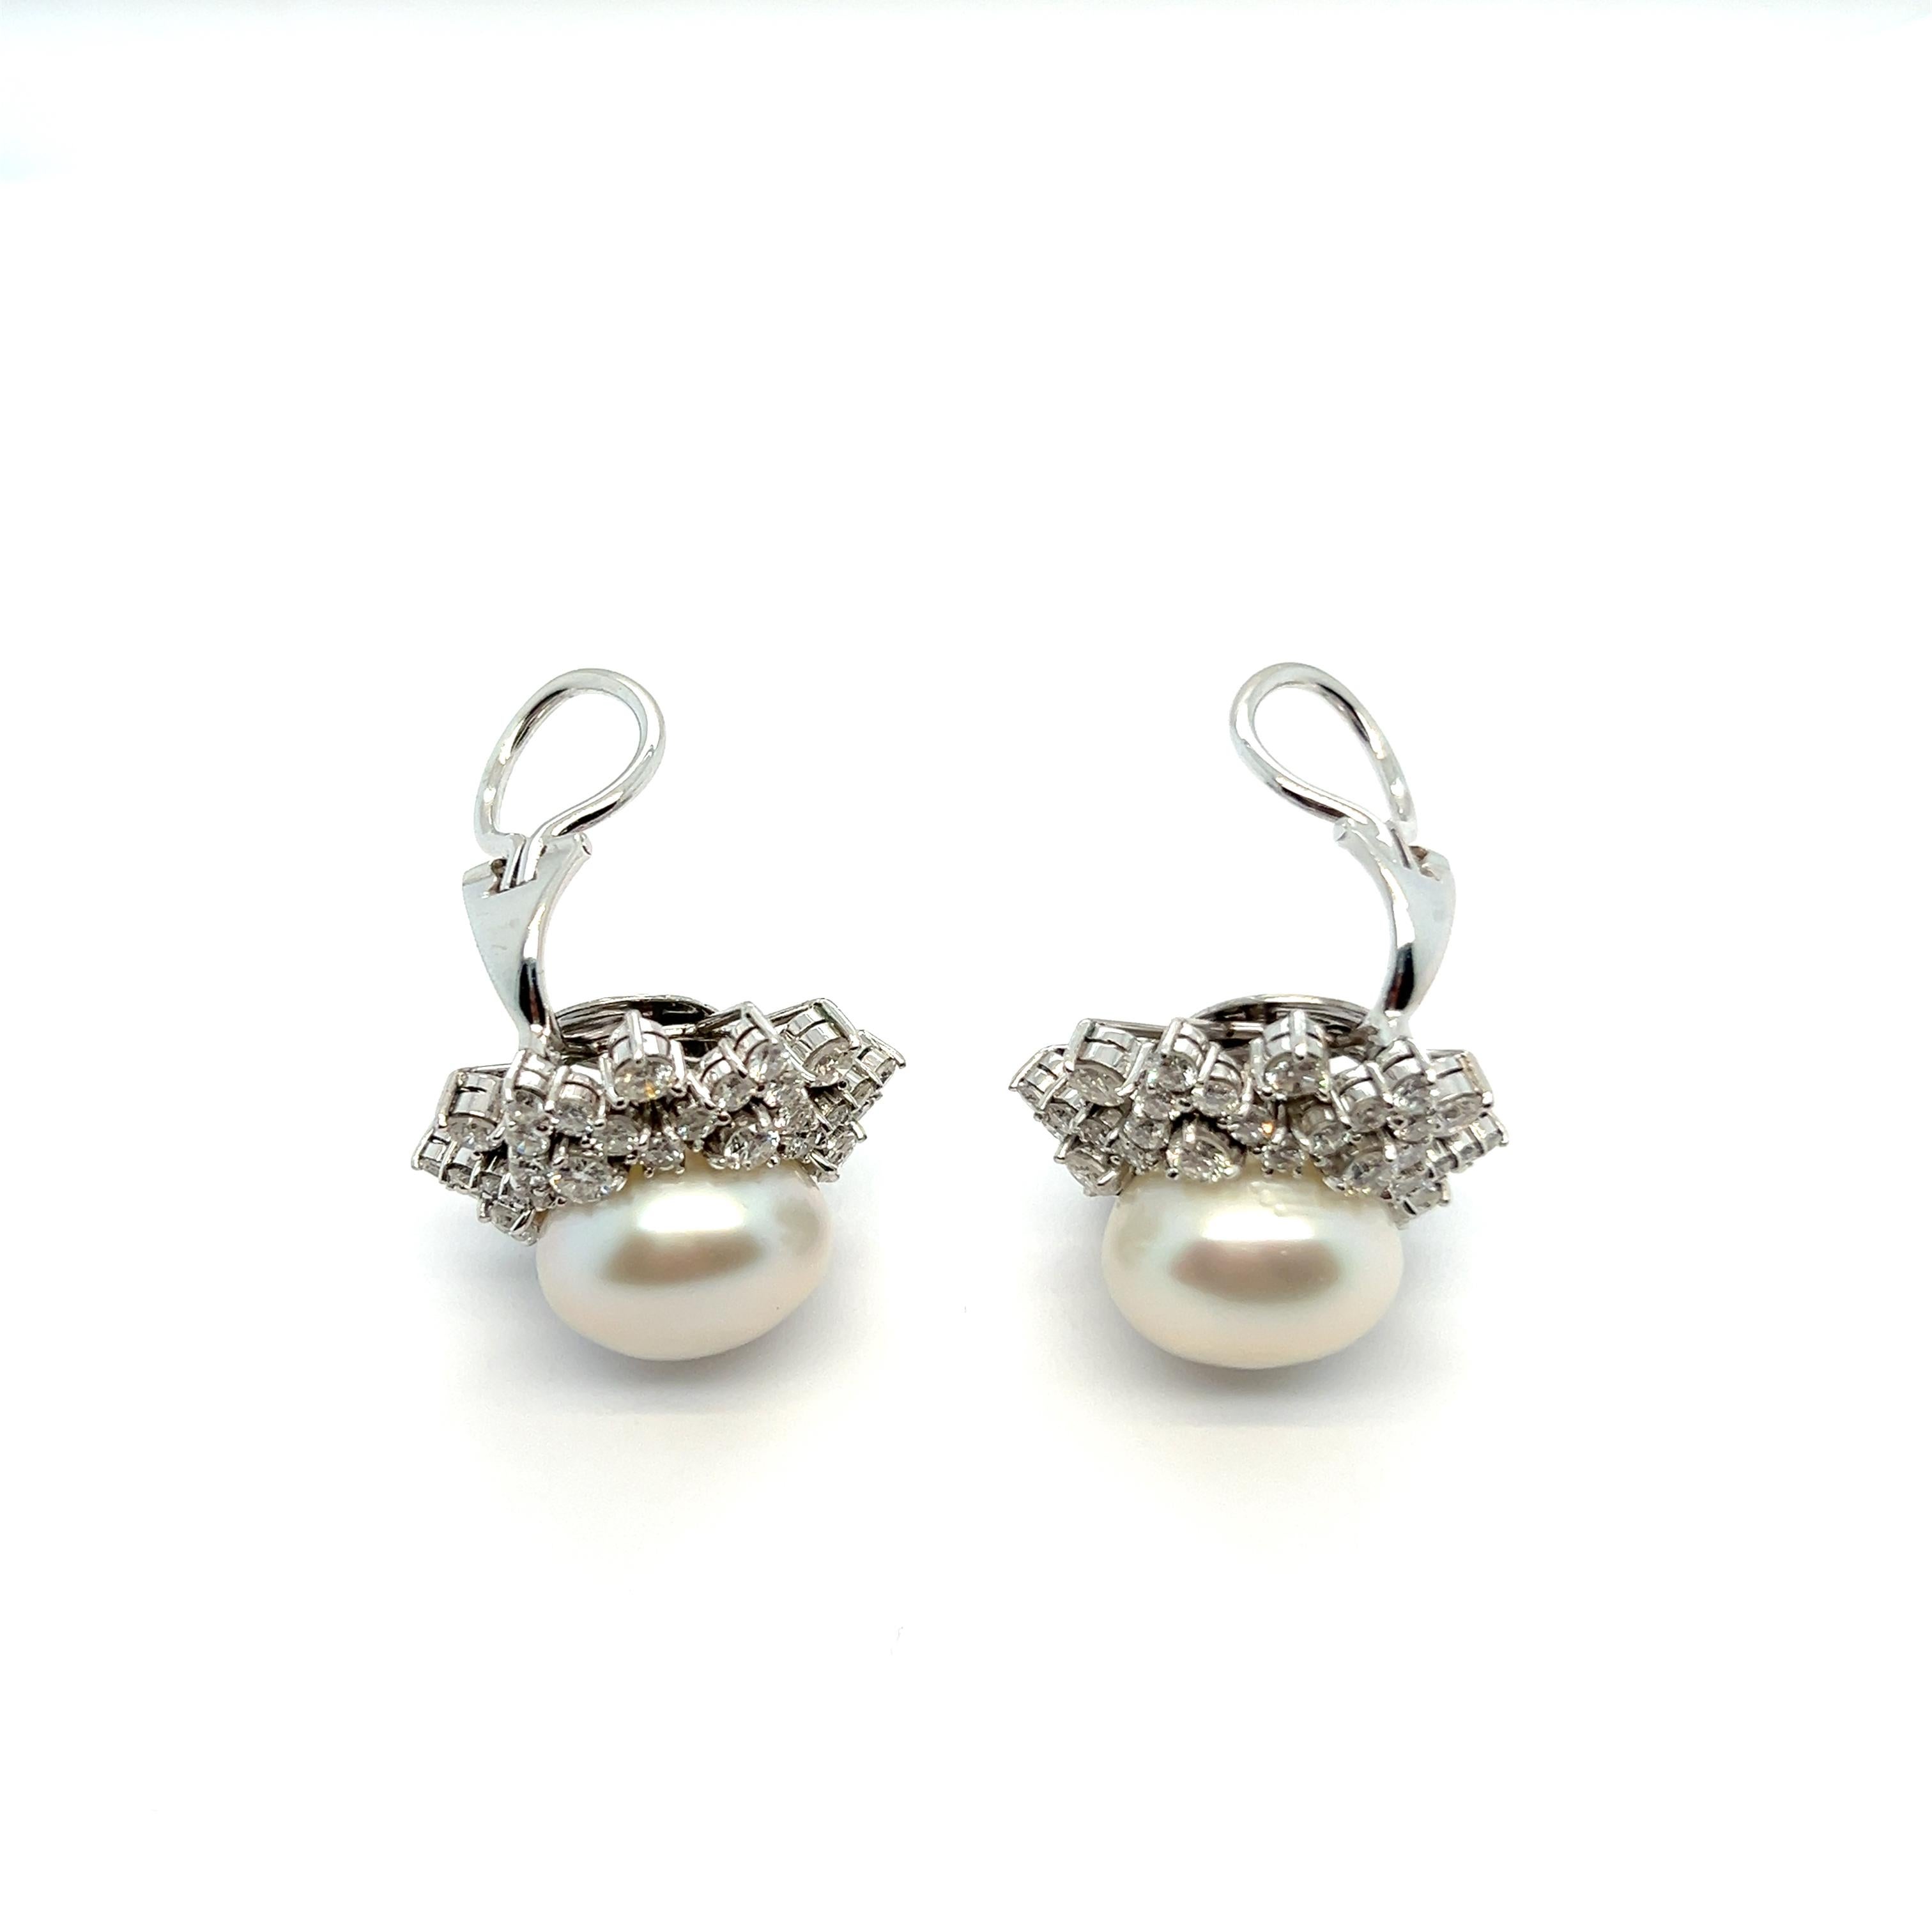 South Sea Pearl Earrings in 18 Karat White Gold by Meister For Sale 6